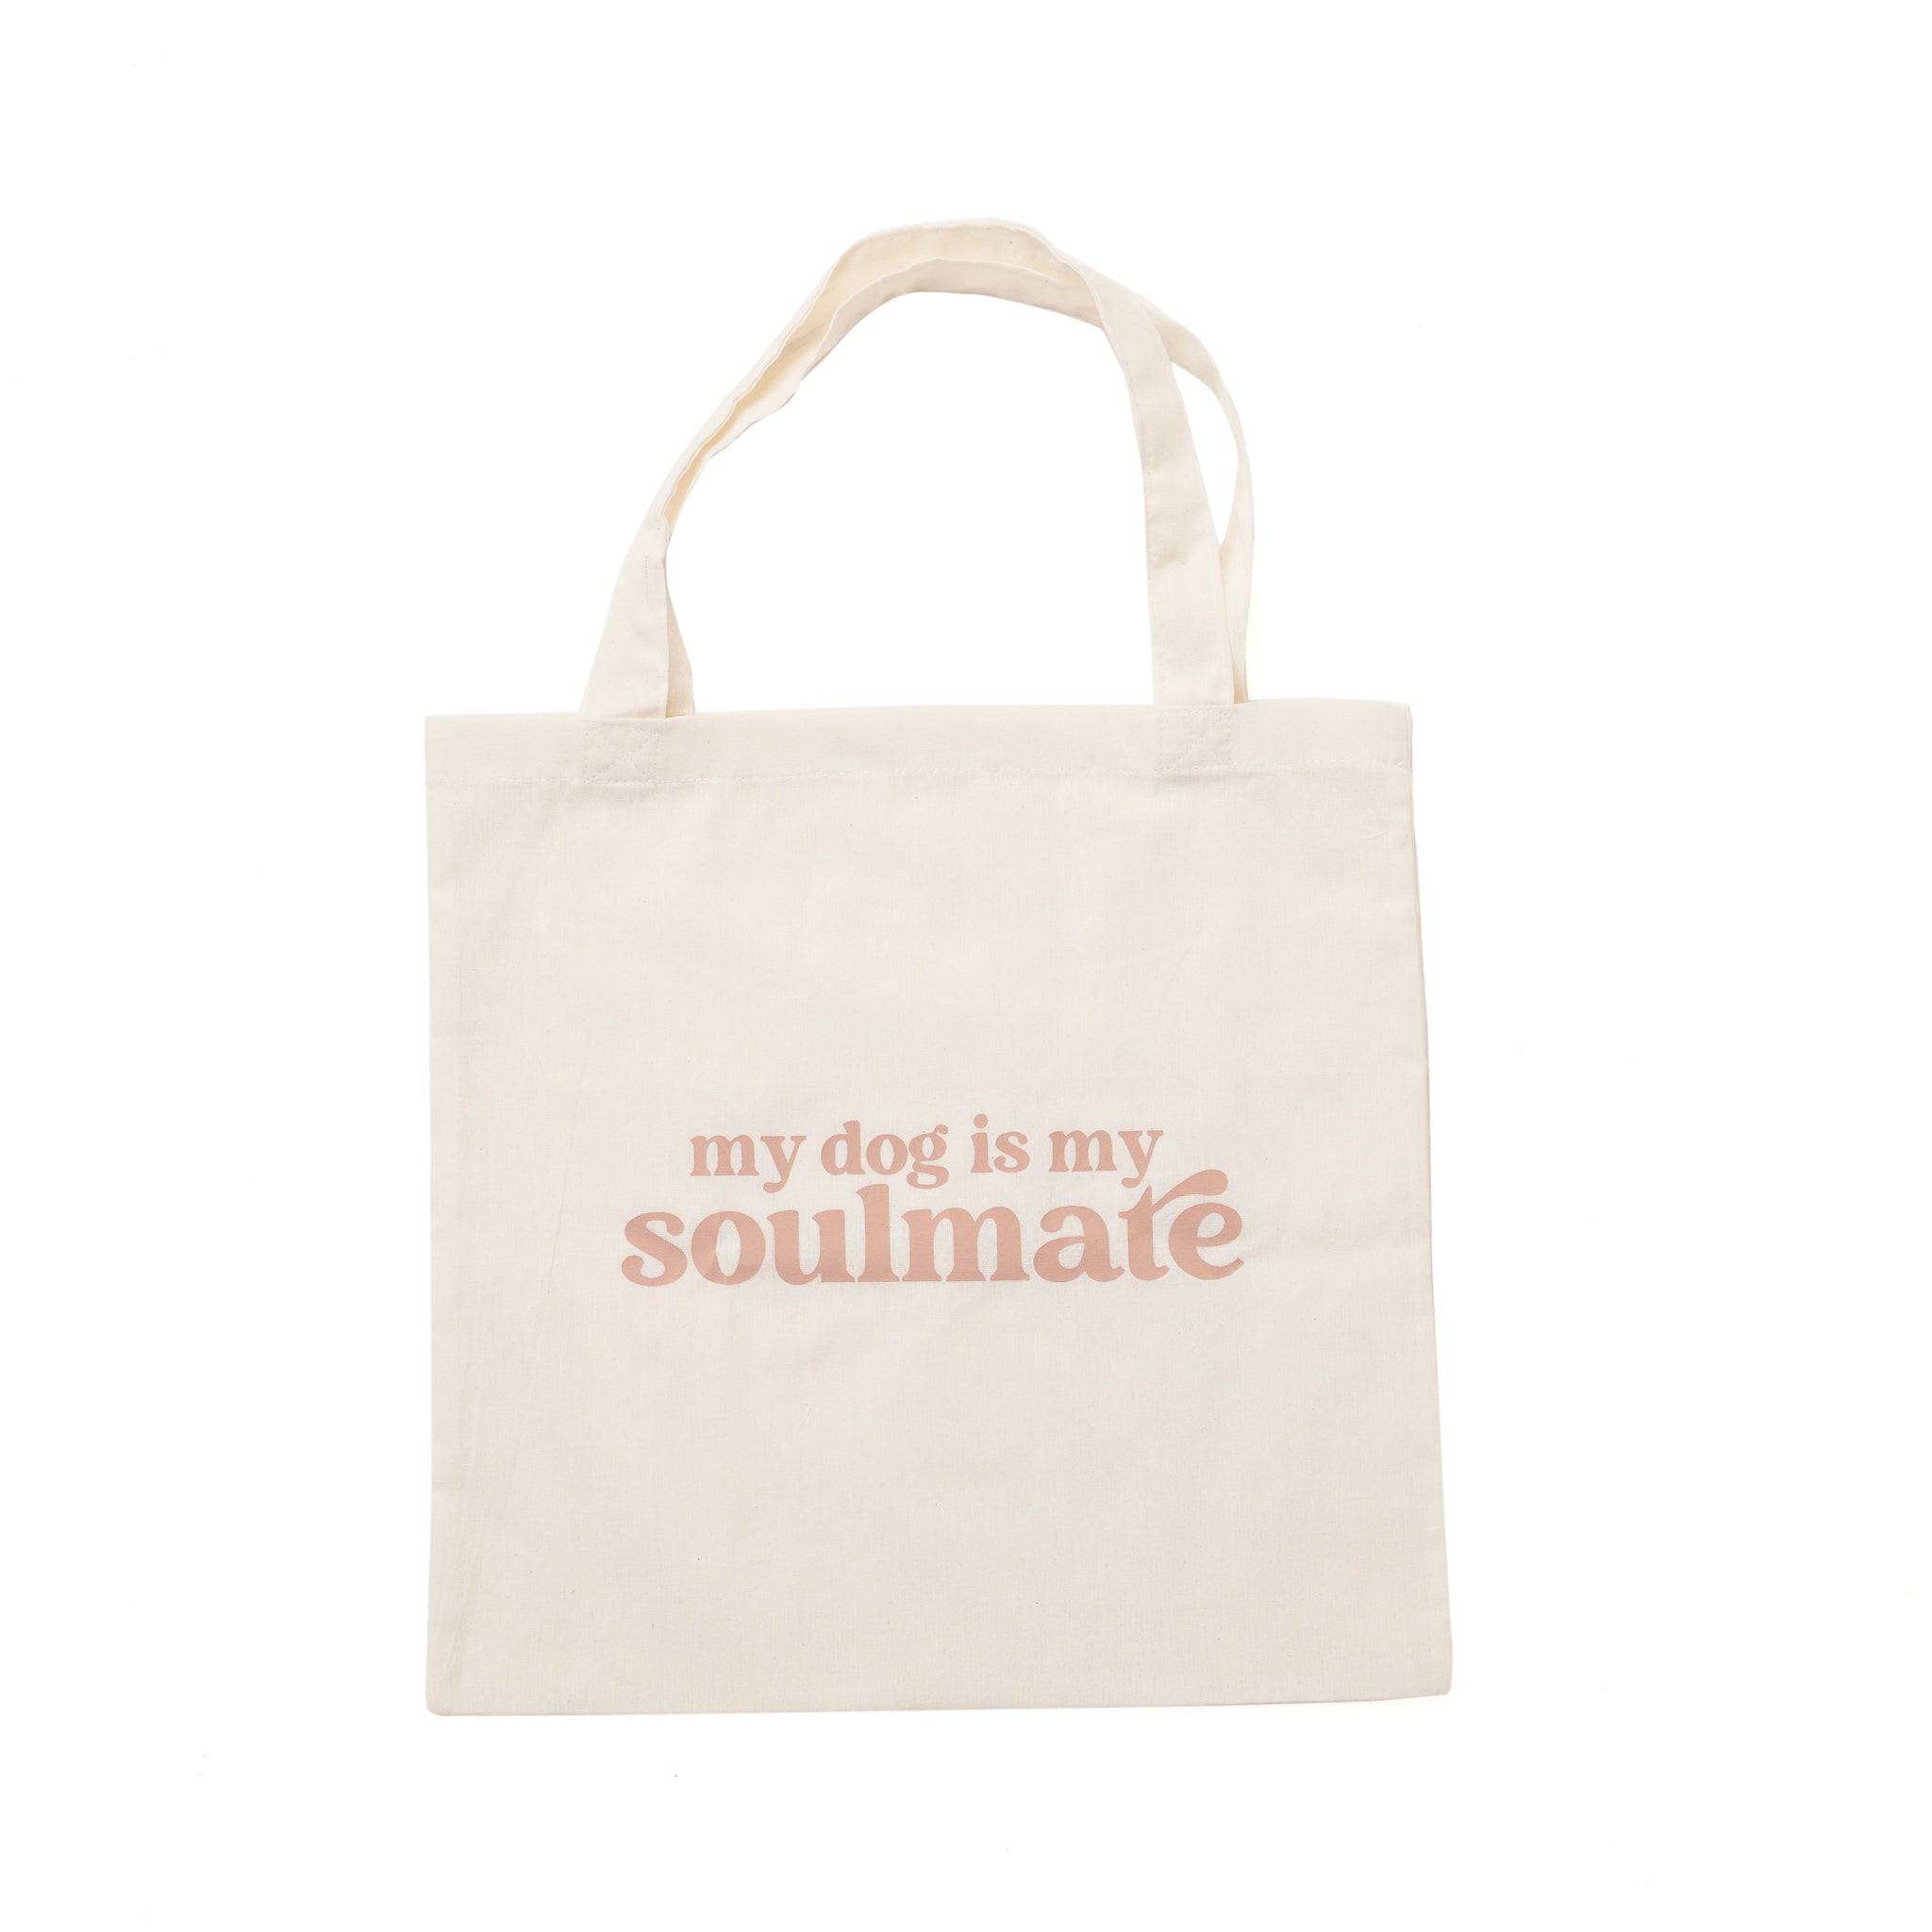 What Is A Tote Bag?, myGemma